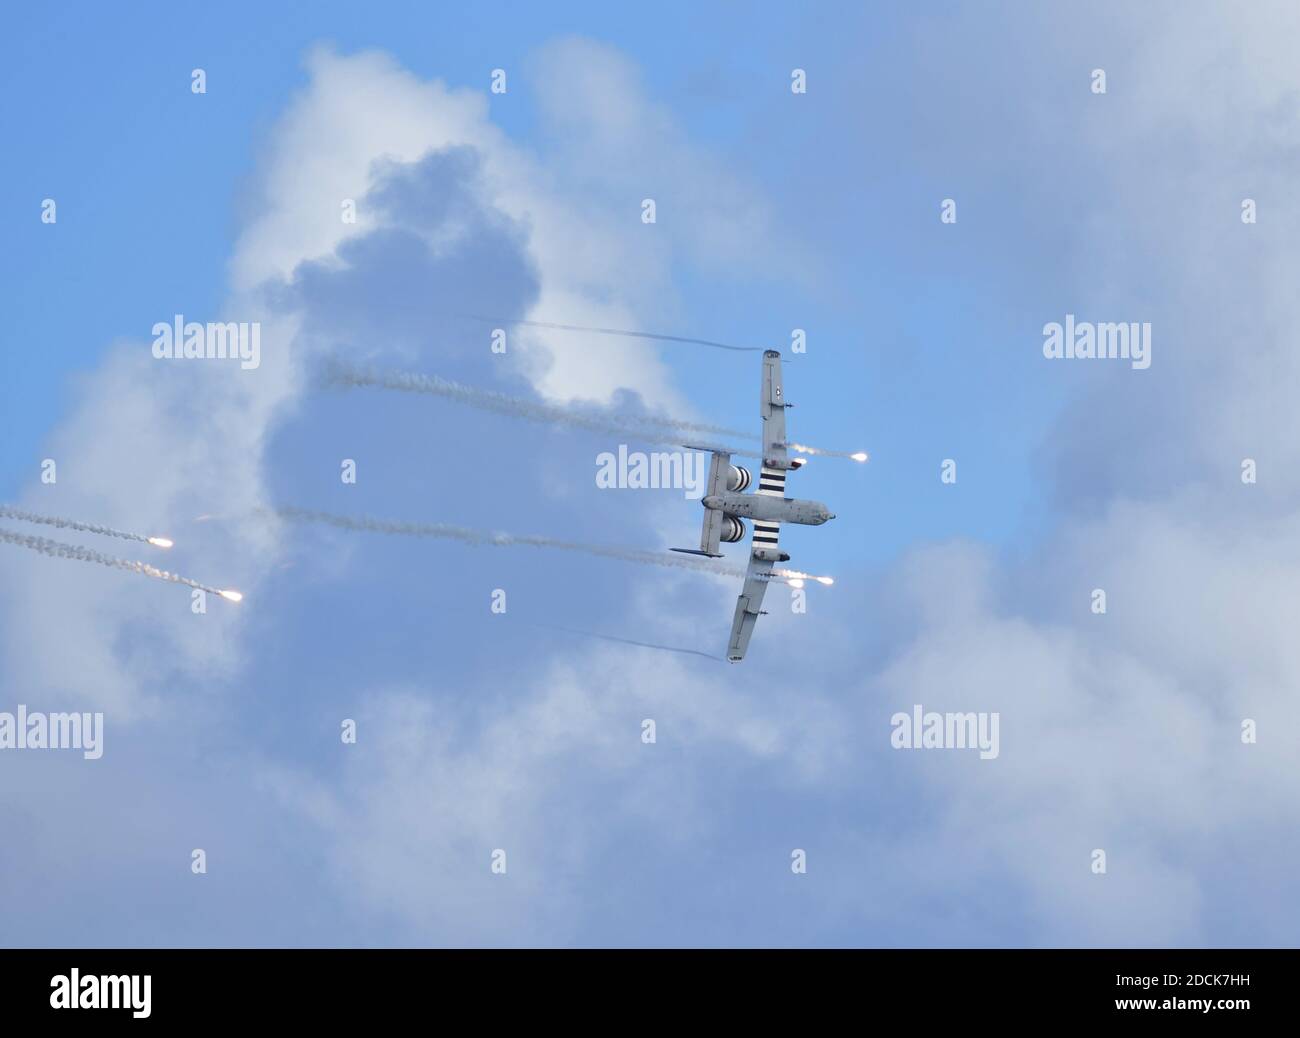 Fort Lauderdale, FL, USA. 21st Nov, 2020. A-10 Warthog Thunderbolt II Demo Team performs in the Fort Lauderdale Air Show on November 21, 2020 in Fort Lauderdale, Florida People: A-10 Warthog Thunderbolt II Demo Team Credit: Hoo Me/Media Punch/Alamy Live News Stock Photo